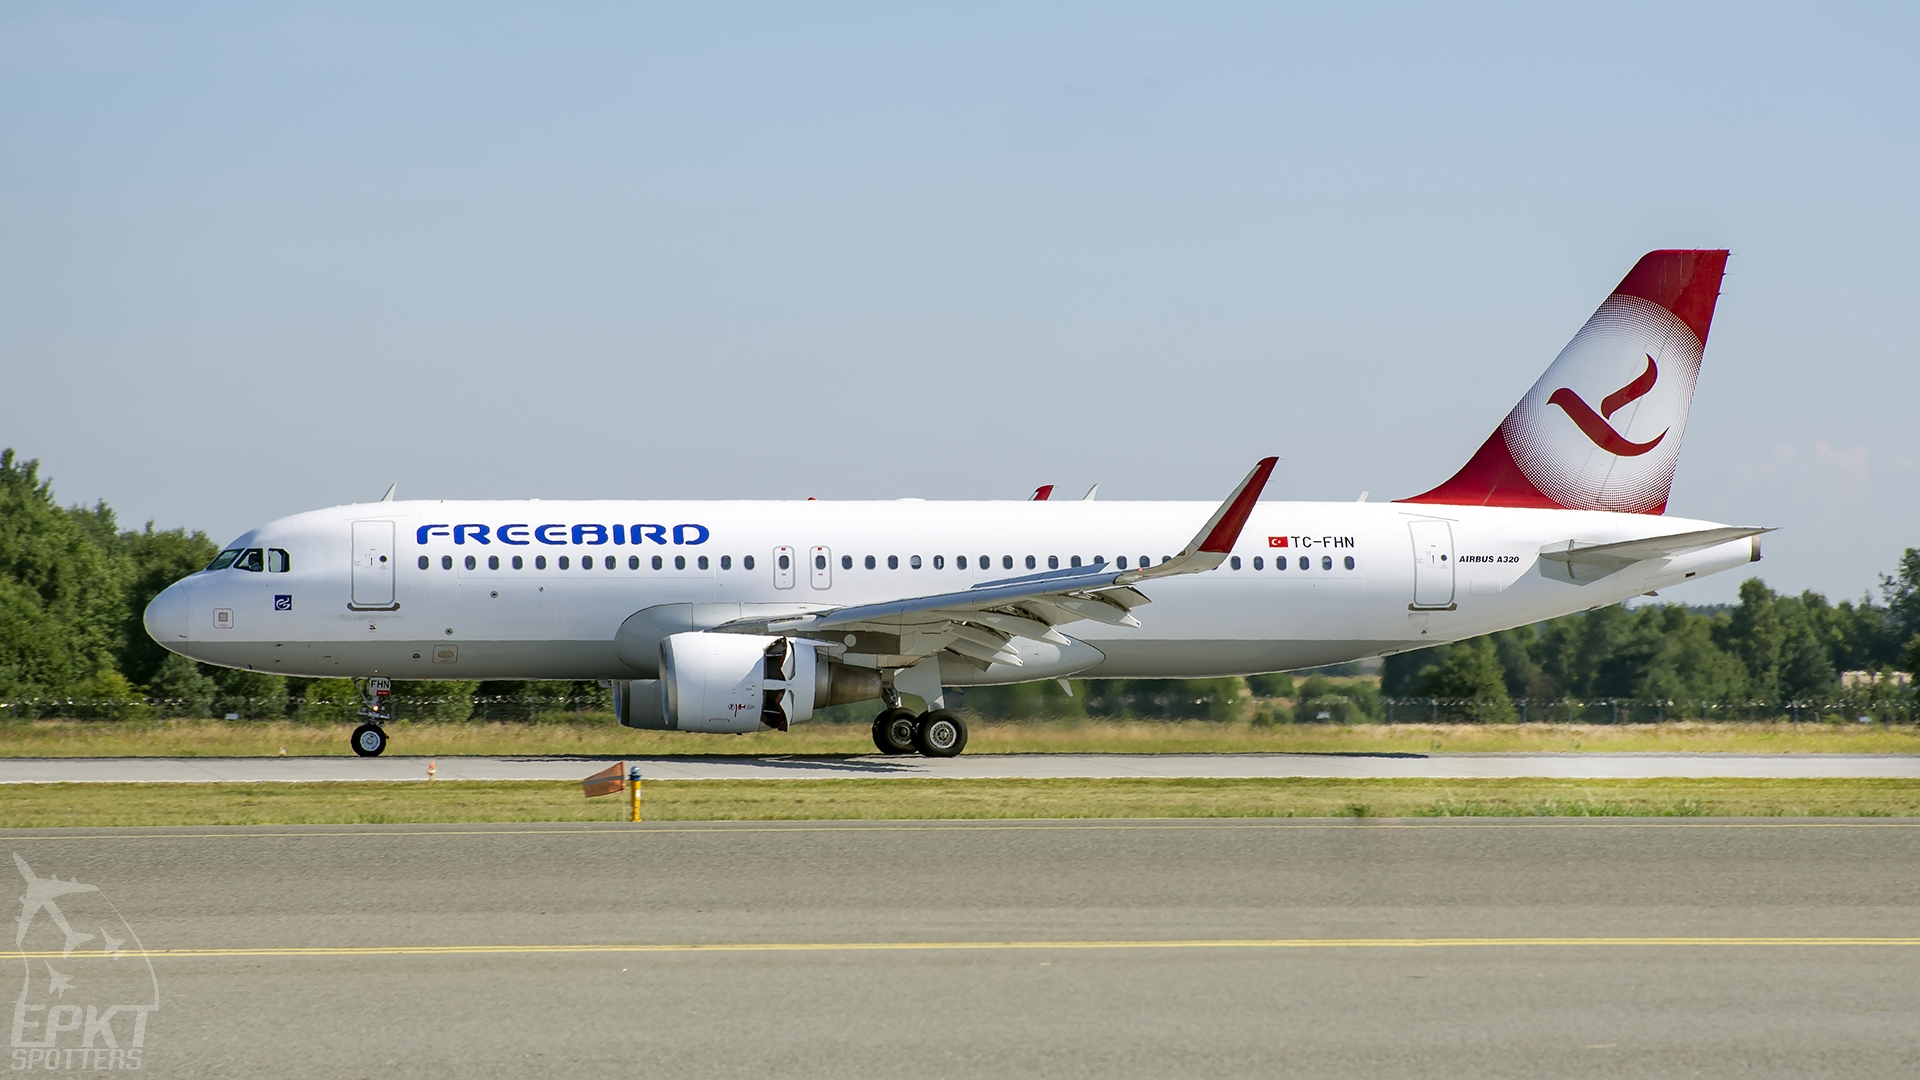 TC-FHN - Airbus A320 -214(WL) (Freebird Airlines) / Pyrzowice - Katowice Poland [EPKT/KTW]